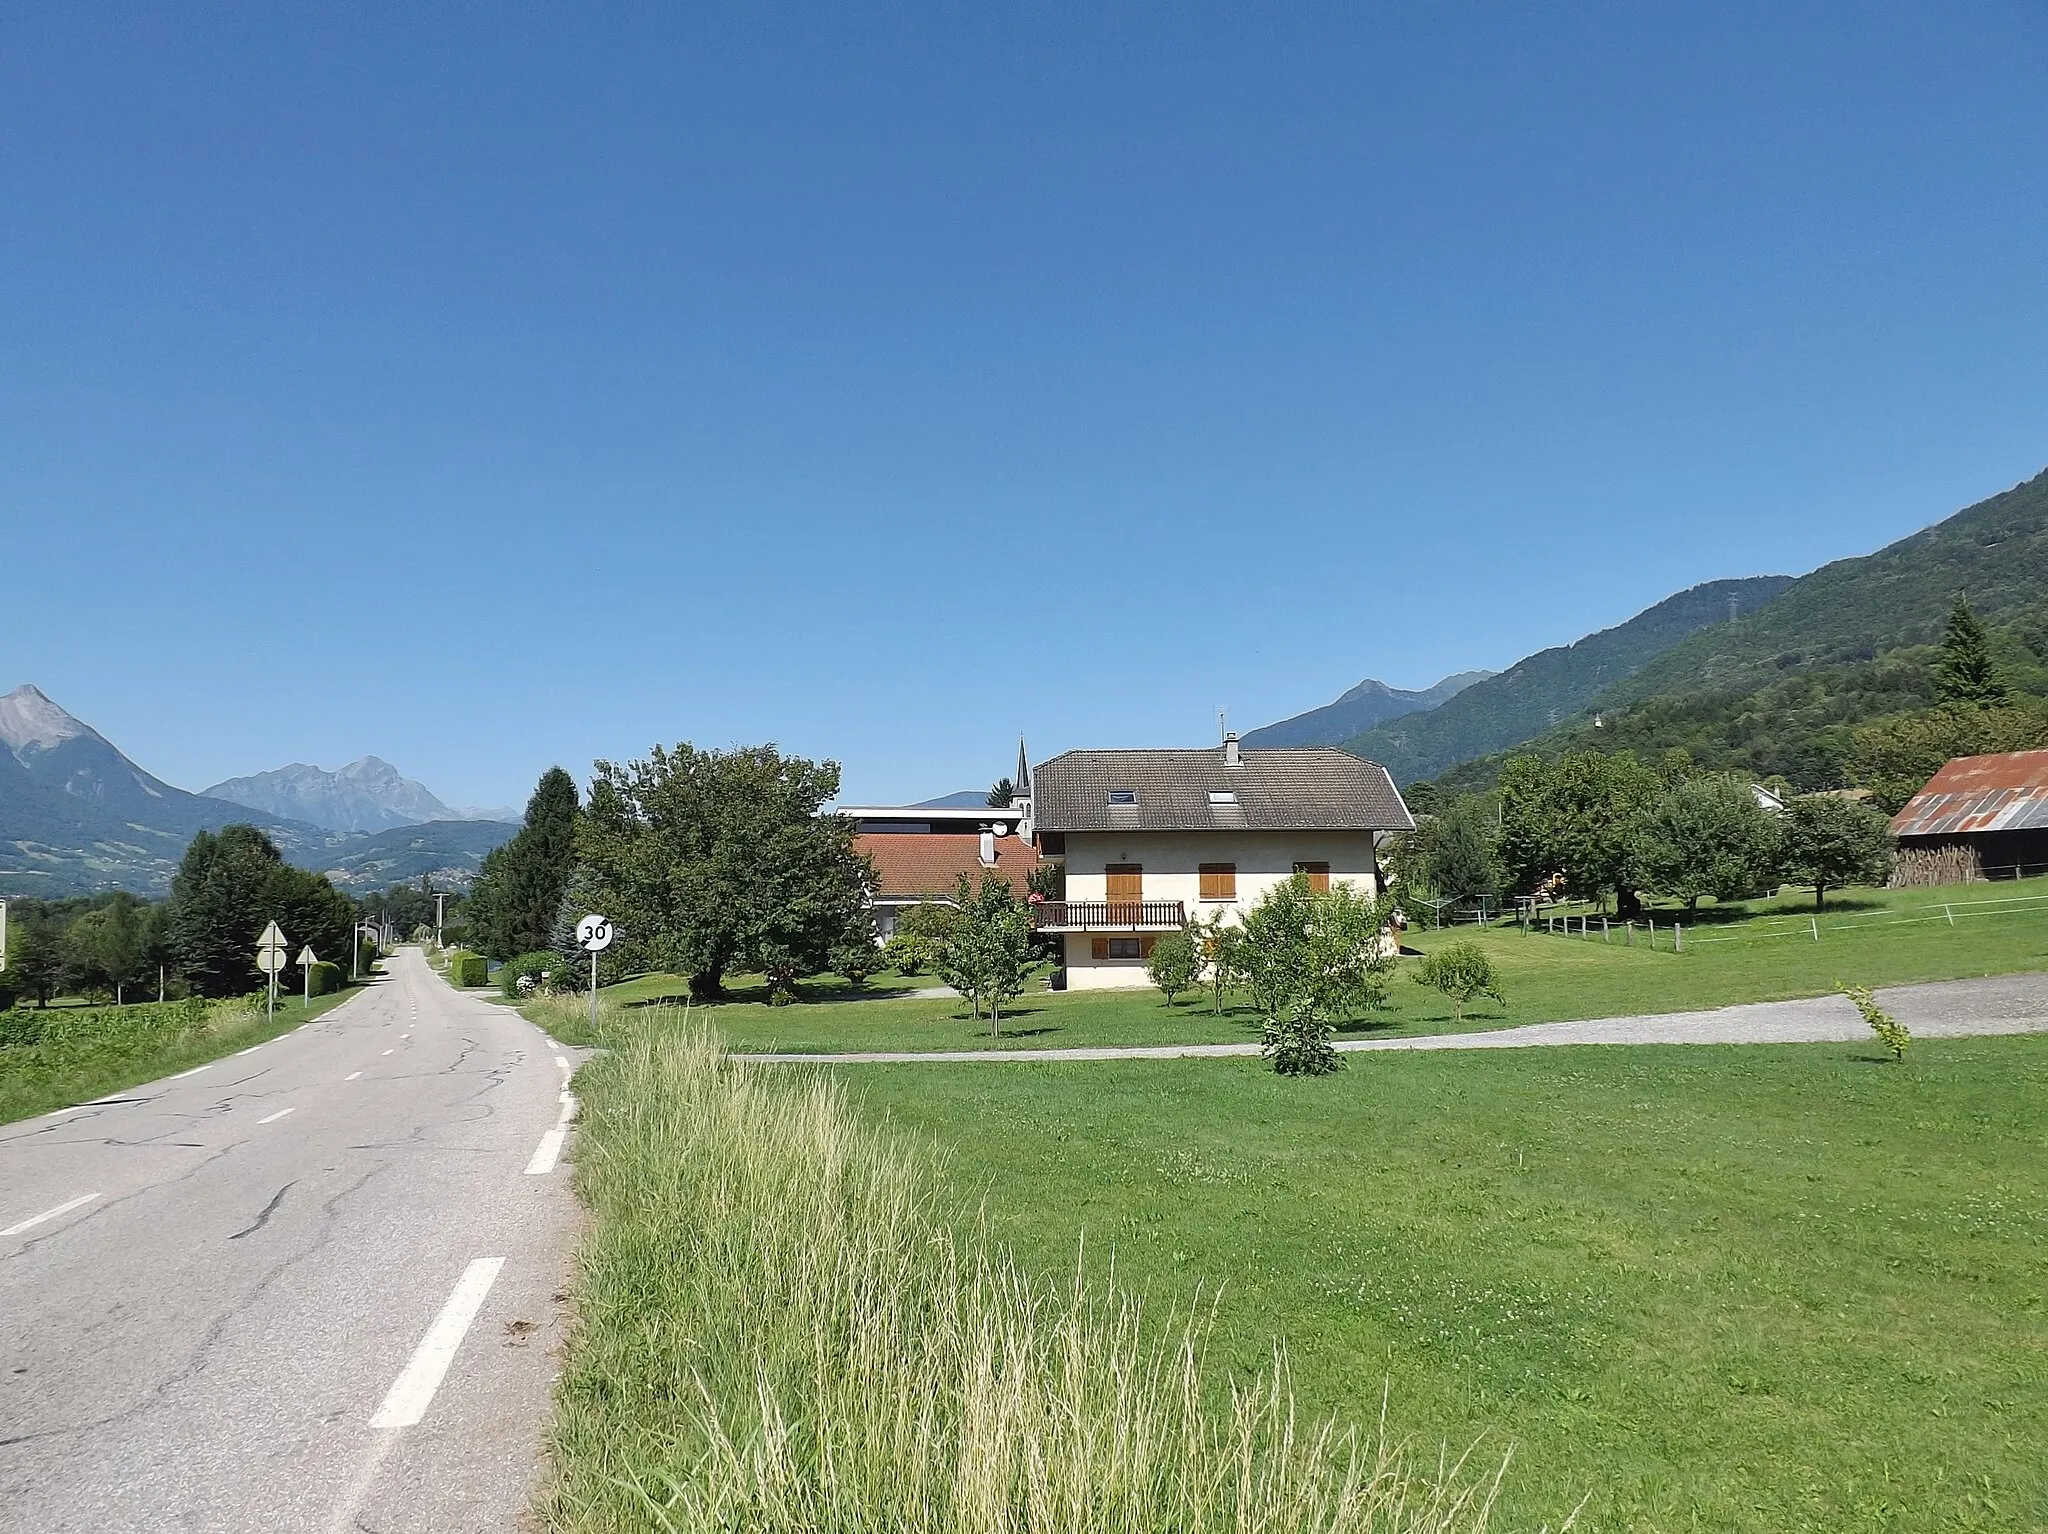 Photo showing: Sight of the French commune of Notre-Dame-des-Millières between Chambéry and Albertville in Savoie, croissed by the RD 925 road.